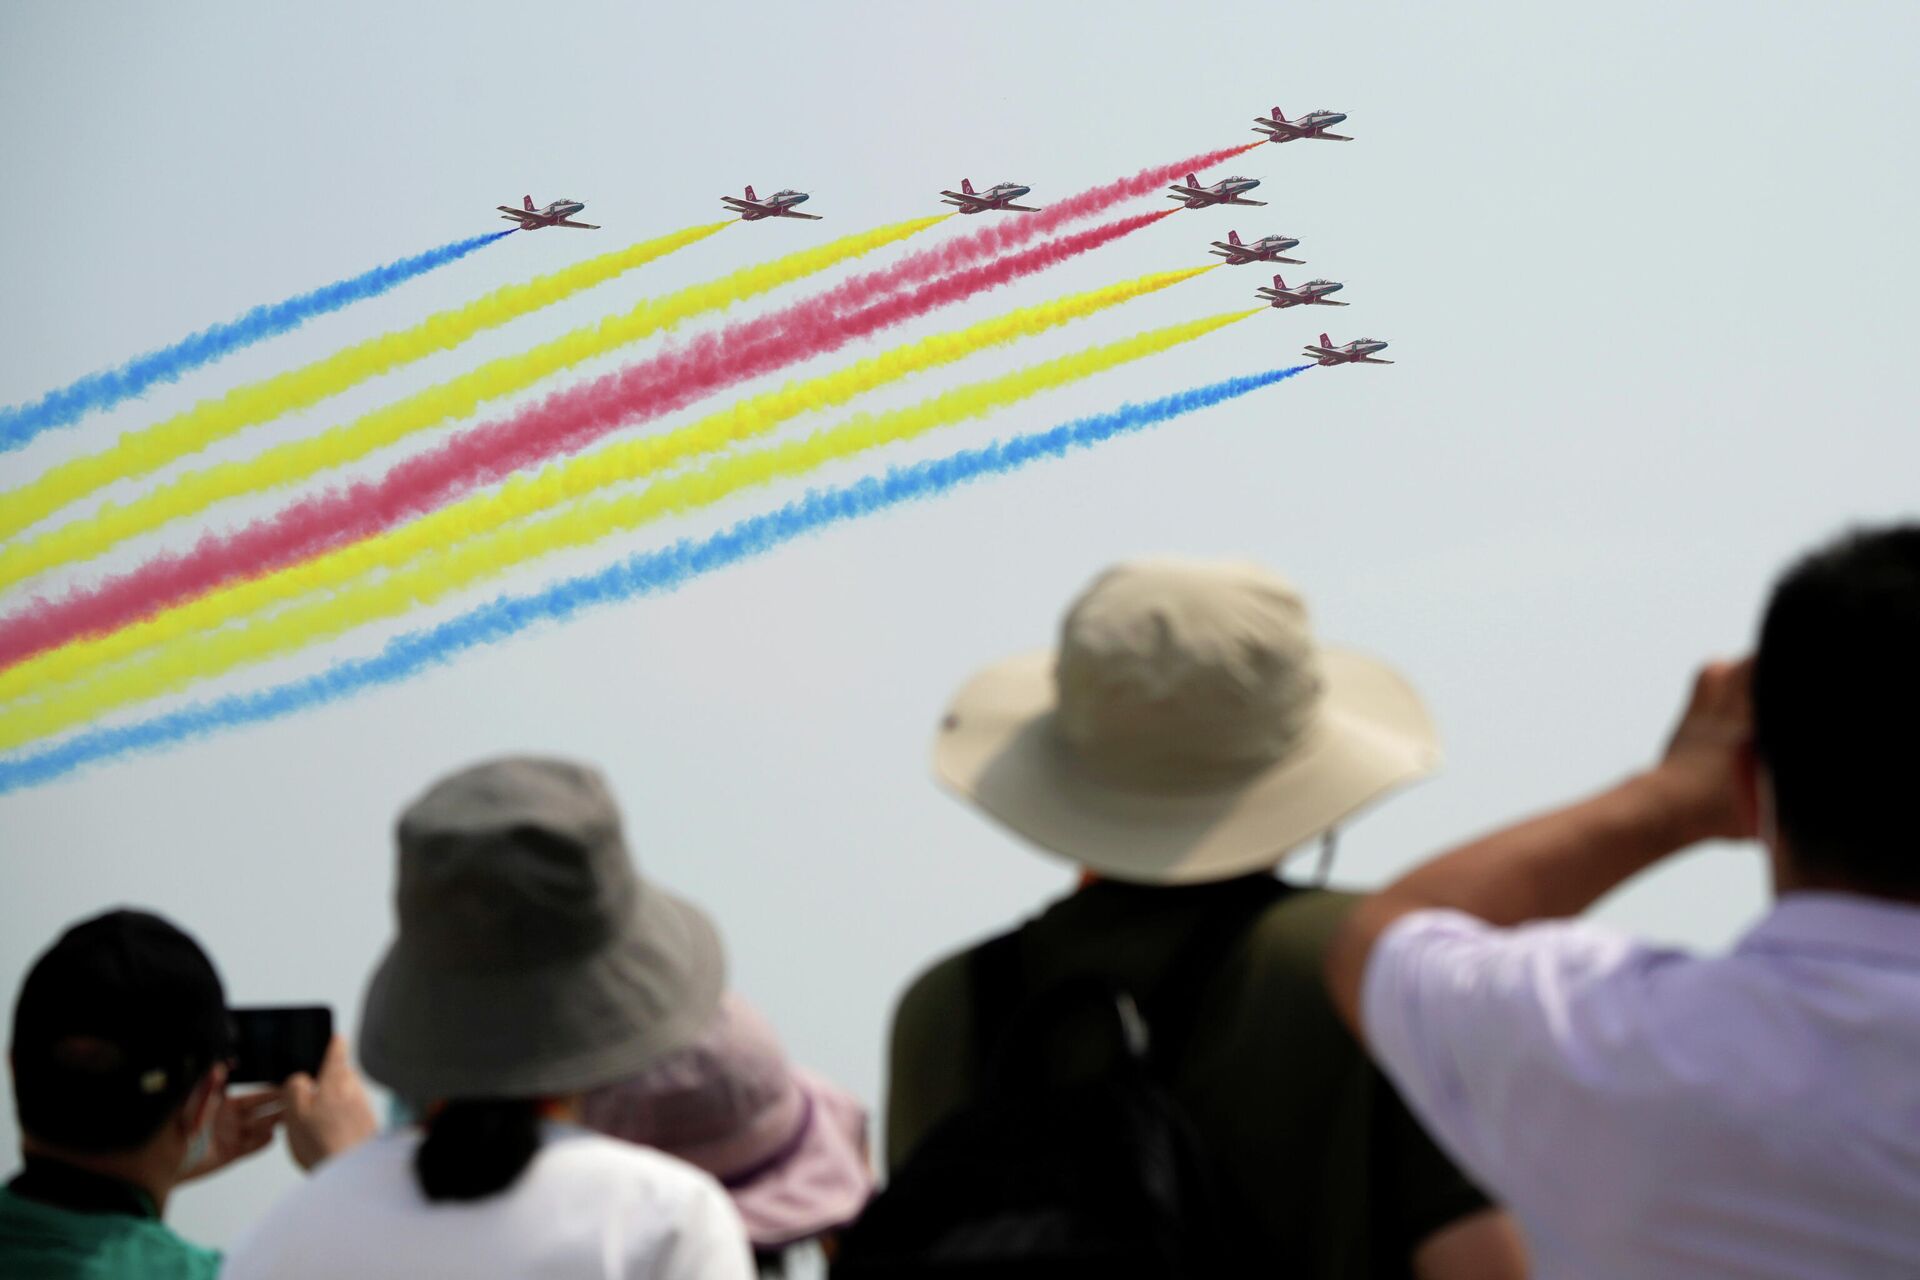 People watch Chinese People's Liberation Army (PLA) Air Force Red Falcon aerobatic team perform at the China International Aviation and Aerospace Exhibition, or Airshow China, in Zhuhai, Guangdong province, China September 28, 2021 - Sputnik International, 1920, 19.10.2021